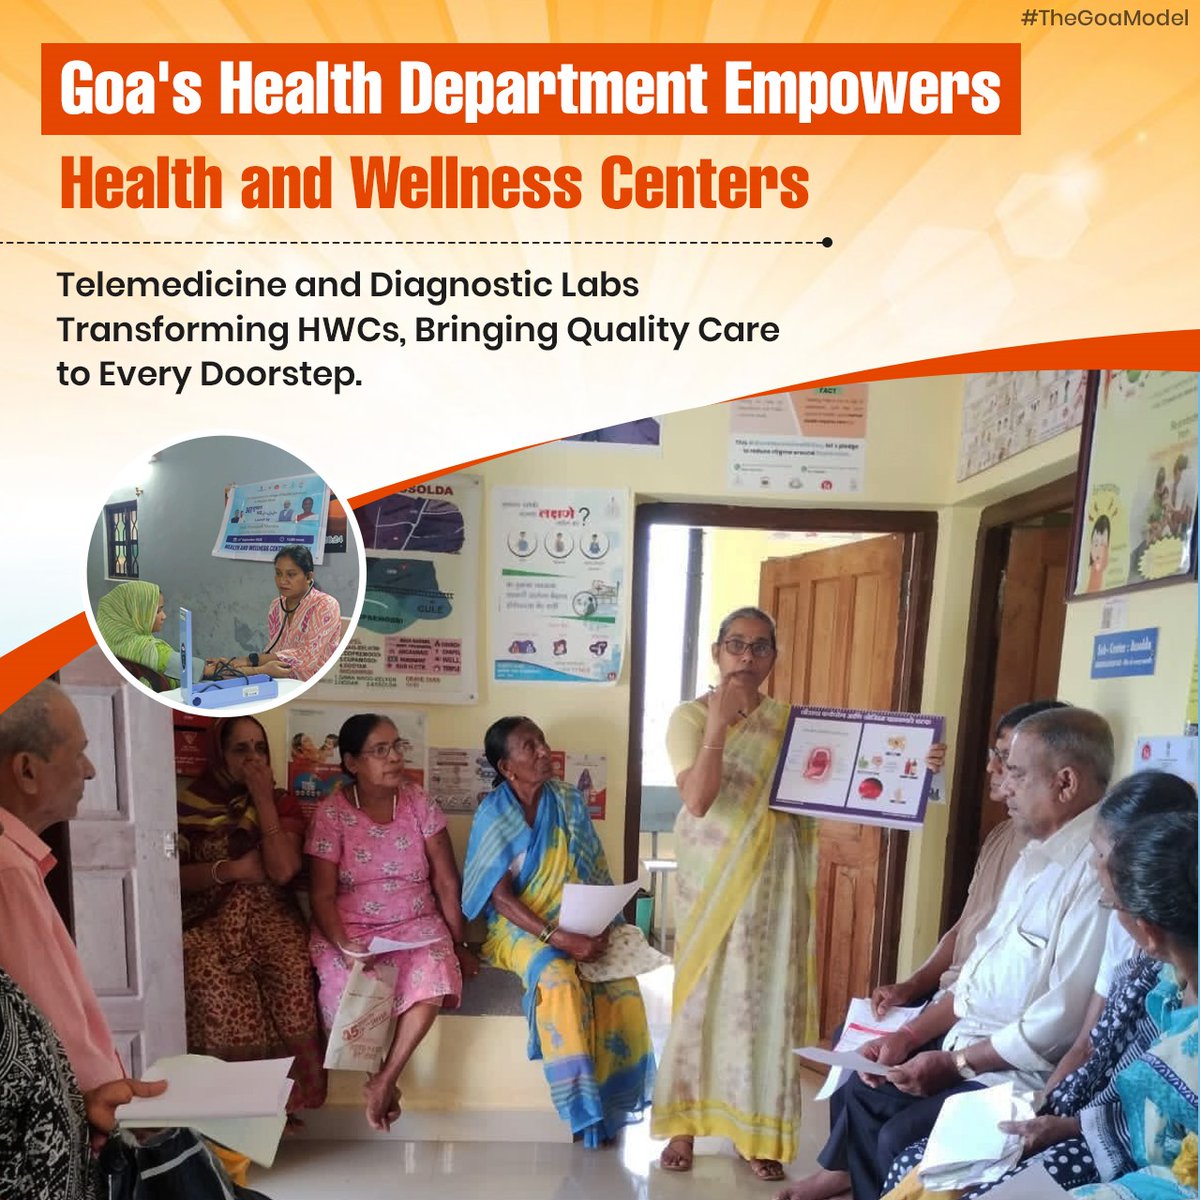 Exciting developments in Goa's healthcare! With telemedicine and diagnostic labs, Health and Wellness Centers are delivering quality care right at people's doorsteps. #GoaHealthcare #WellnessCenters #TheGoaModel
#HealthcareInnovation #Telemedicine #DiagnosticLabs